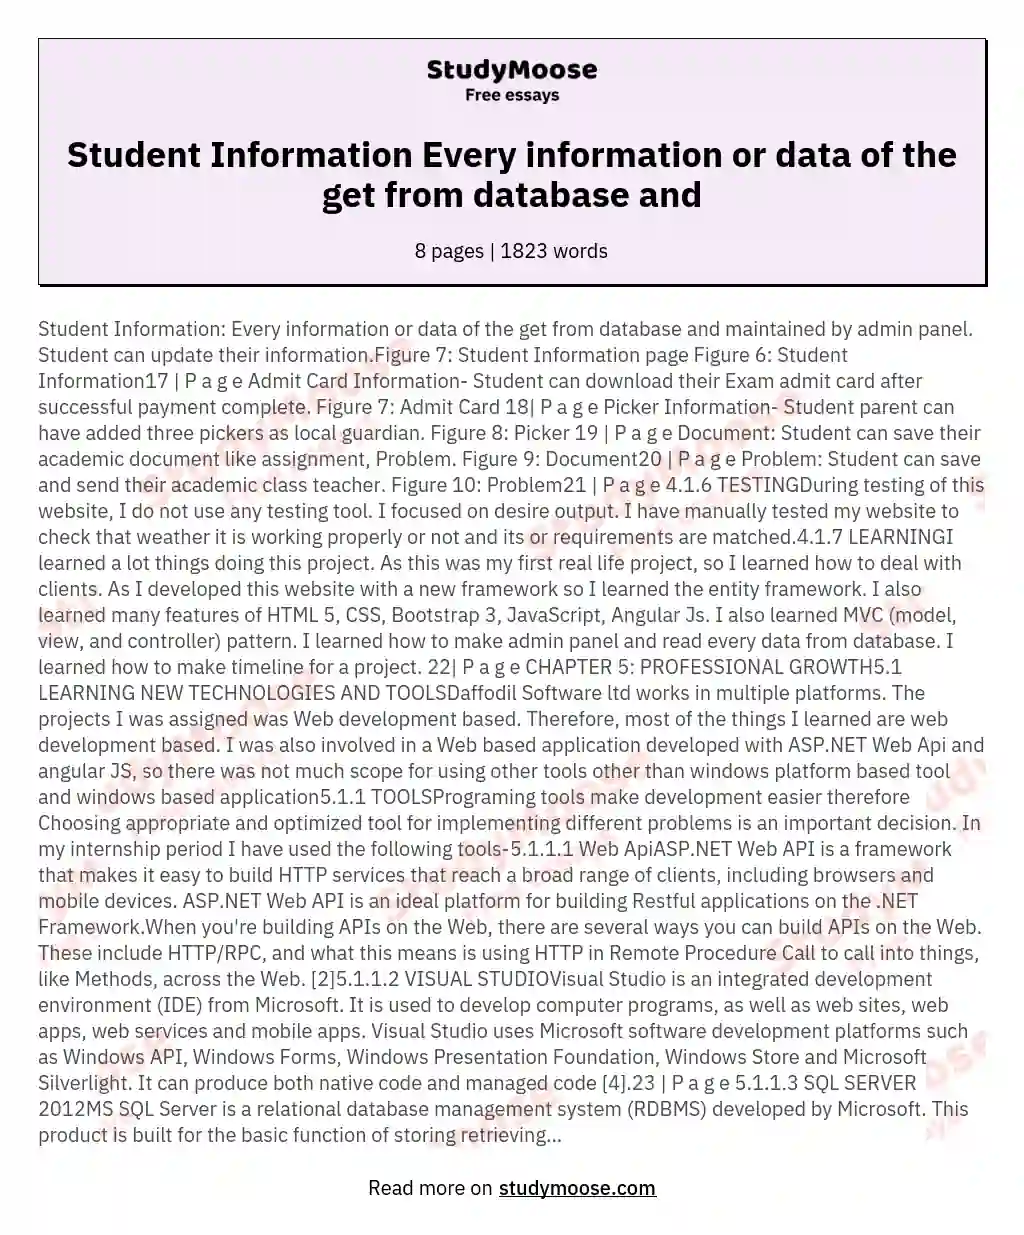 Student Information Every information or data of the get from database and